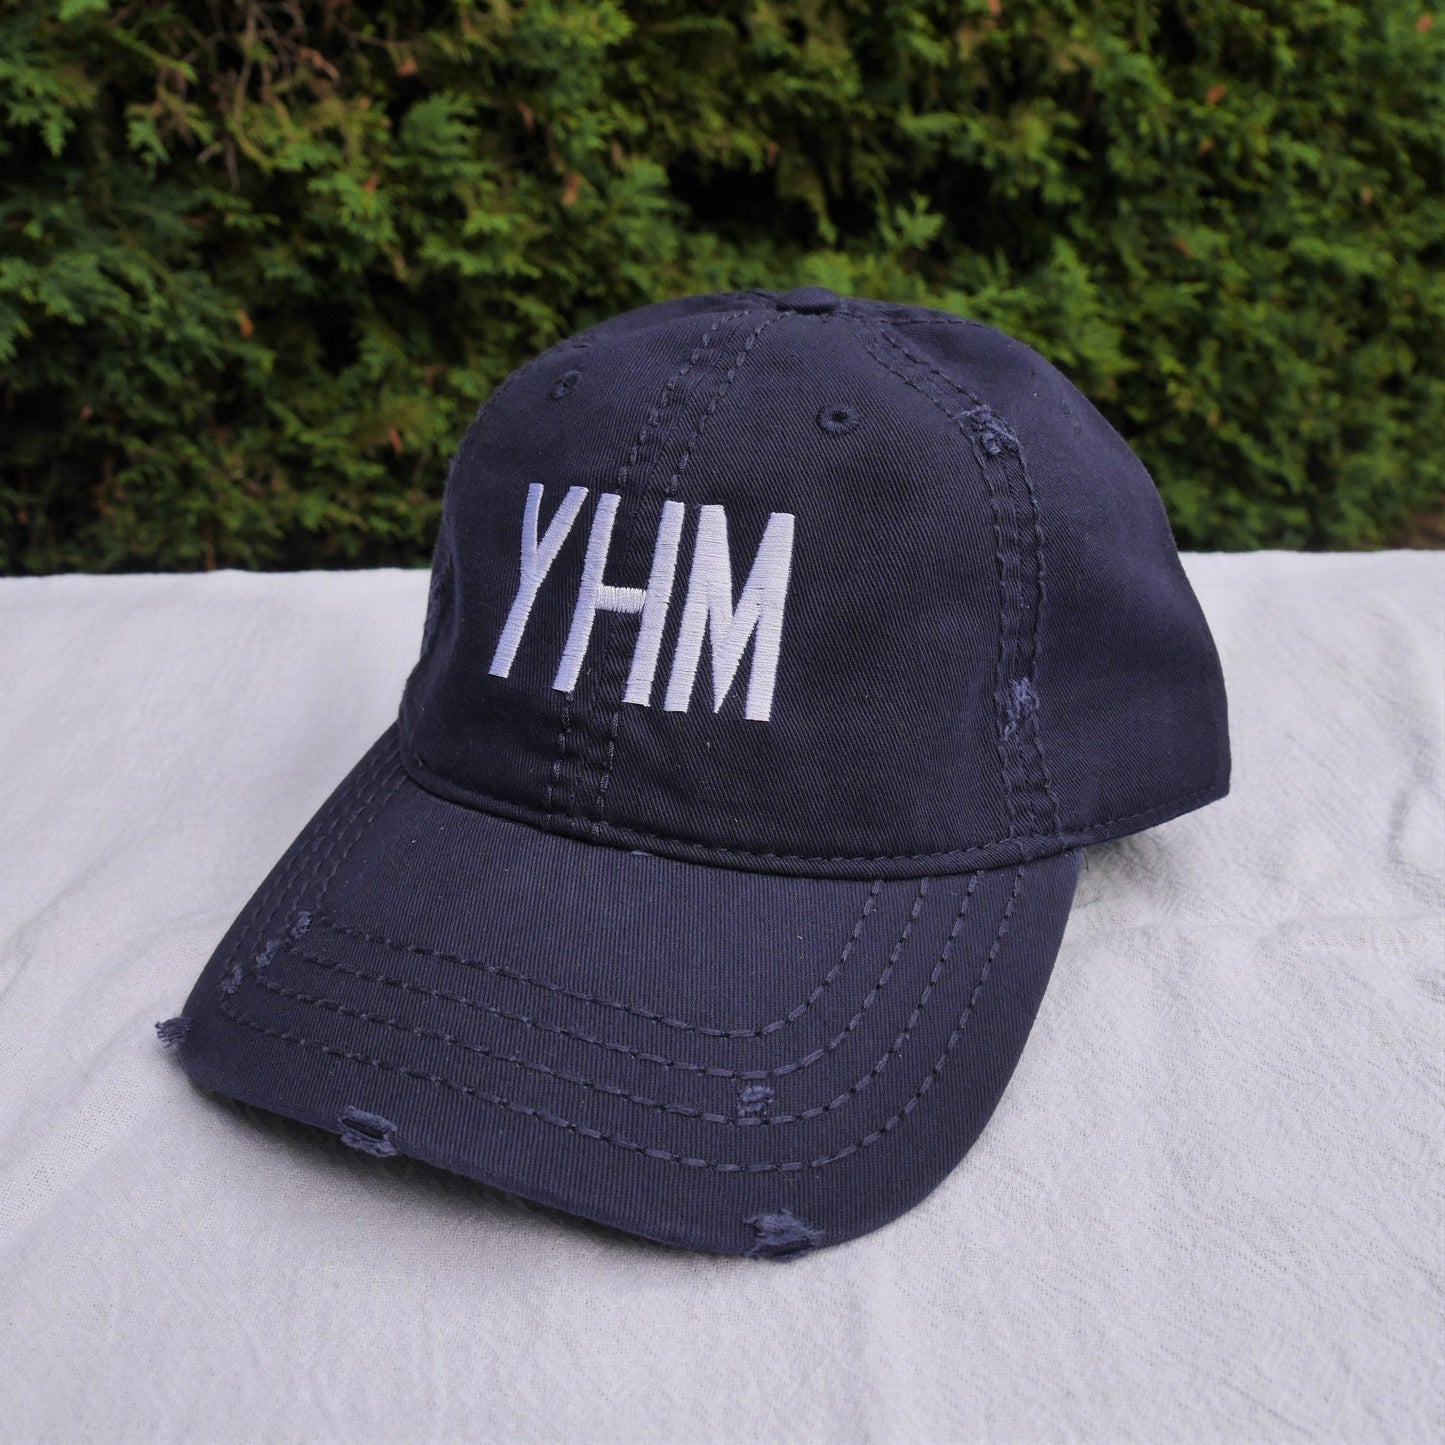 Airport Code Distressed Hat - White • OAK Oakland • YHM Designs - Image 21